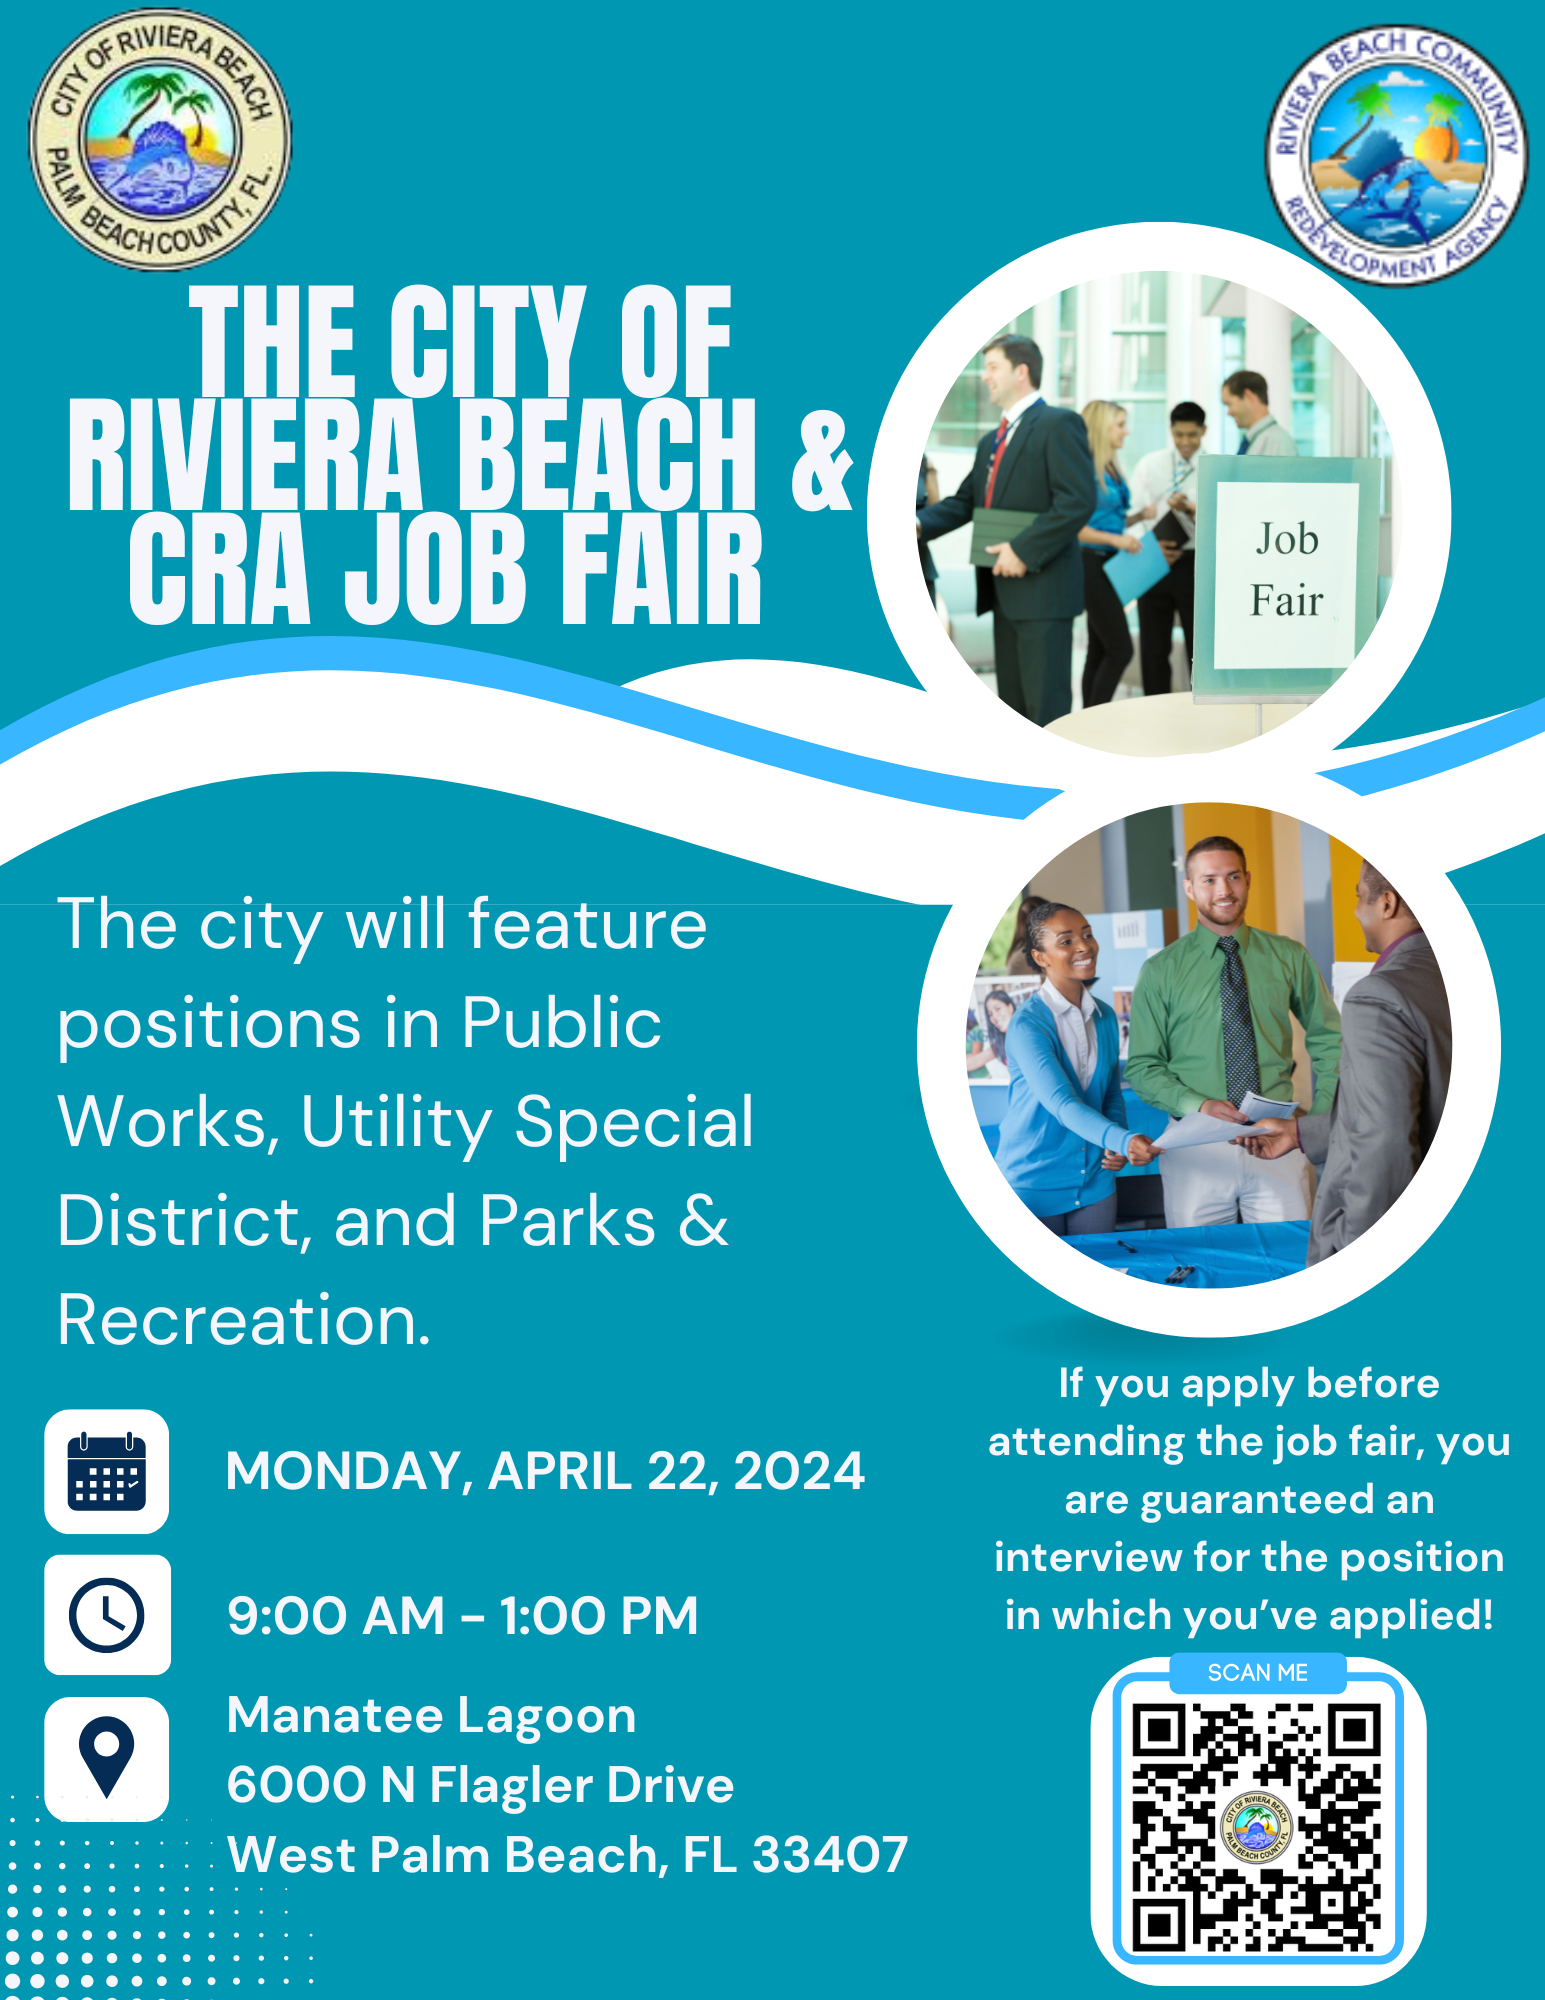 THE CITY OF RIVIERA BEACH & CRA JOB FAIR Job Fair The city will feature positions in Public Works, Utility Special District, and Parks & Recreation.  MONDAY, APRIL 22, 2024  9:00 AM - 1:00 PM  Manatee Lagoon 6000 N Flagler Drive  West Palm Beach, FL 33407